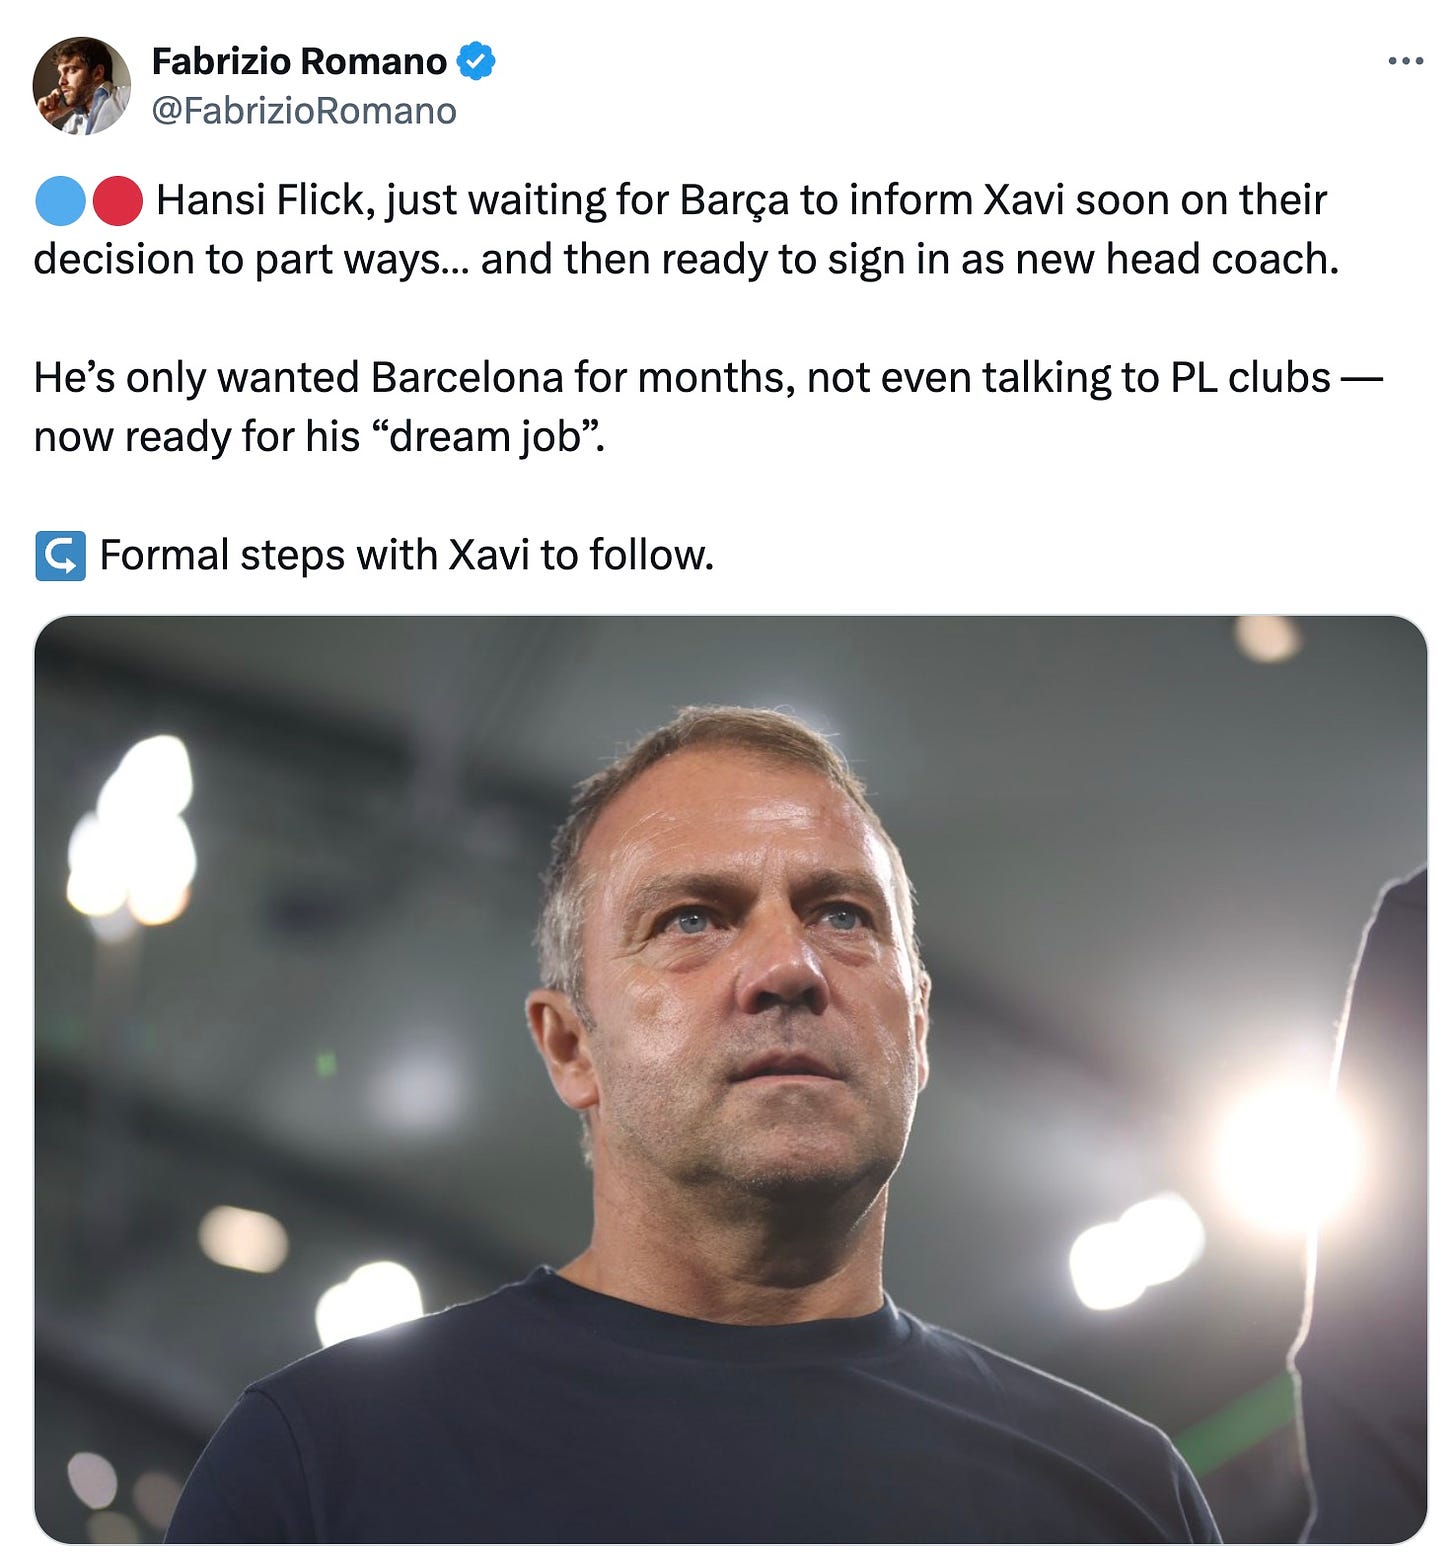 A tweet by Fabrizio Romano about Hansi Flick being set to be hired by Barcelona